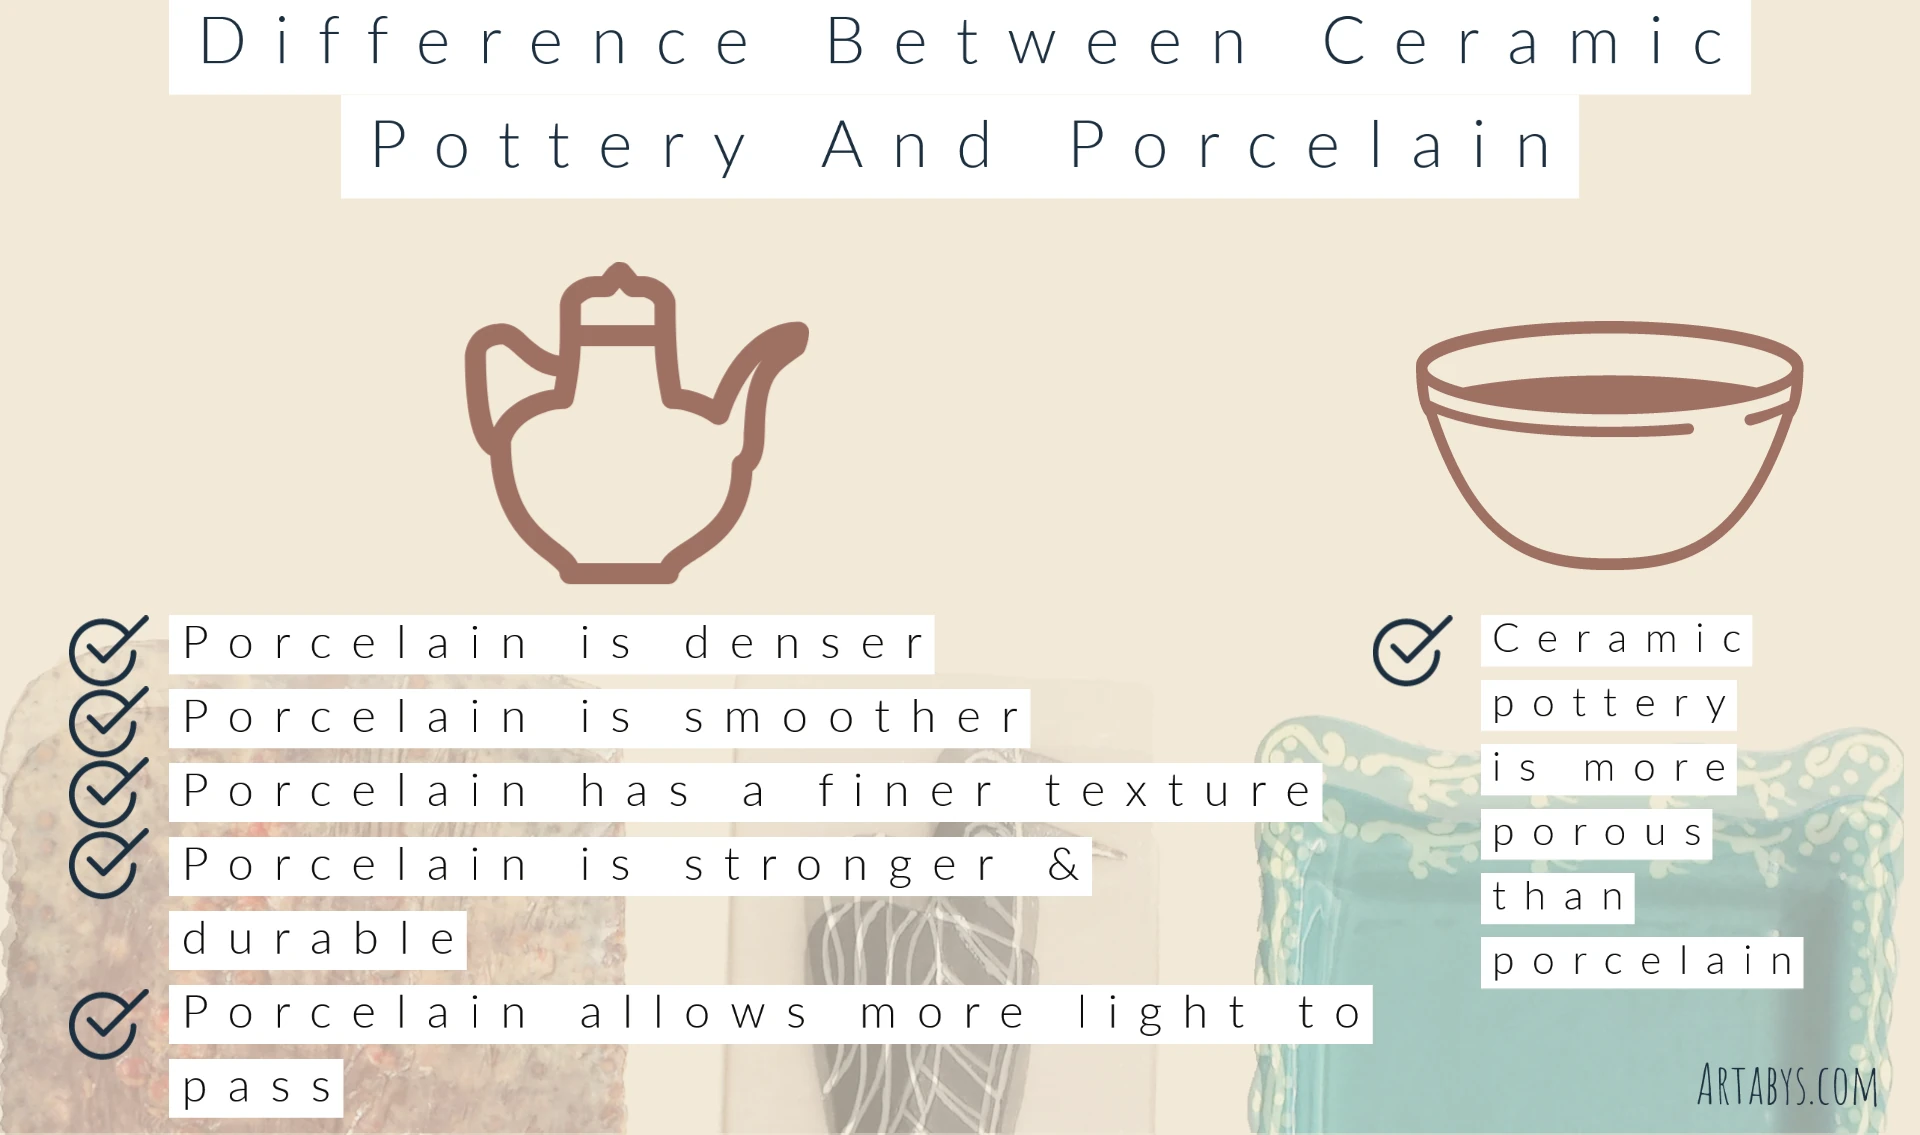 What’s The Difference Between Ceramic Pottery And Porcelain